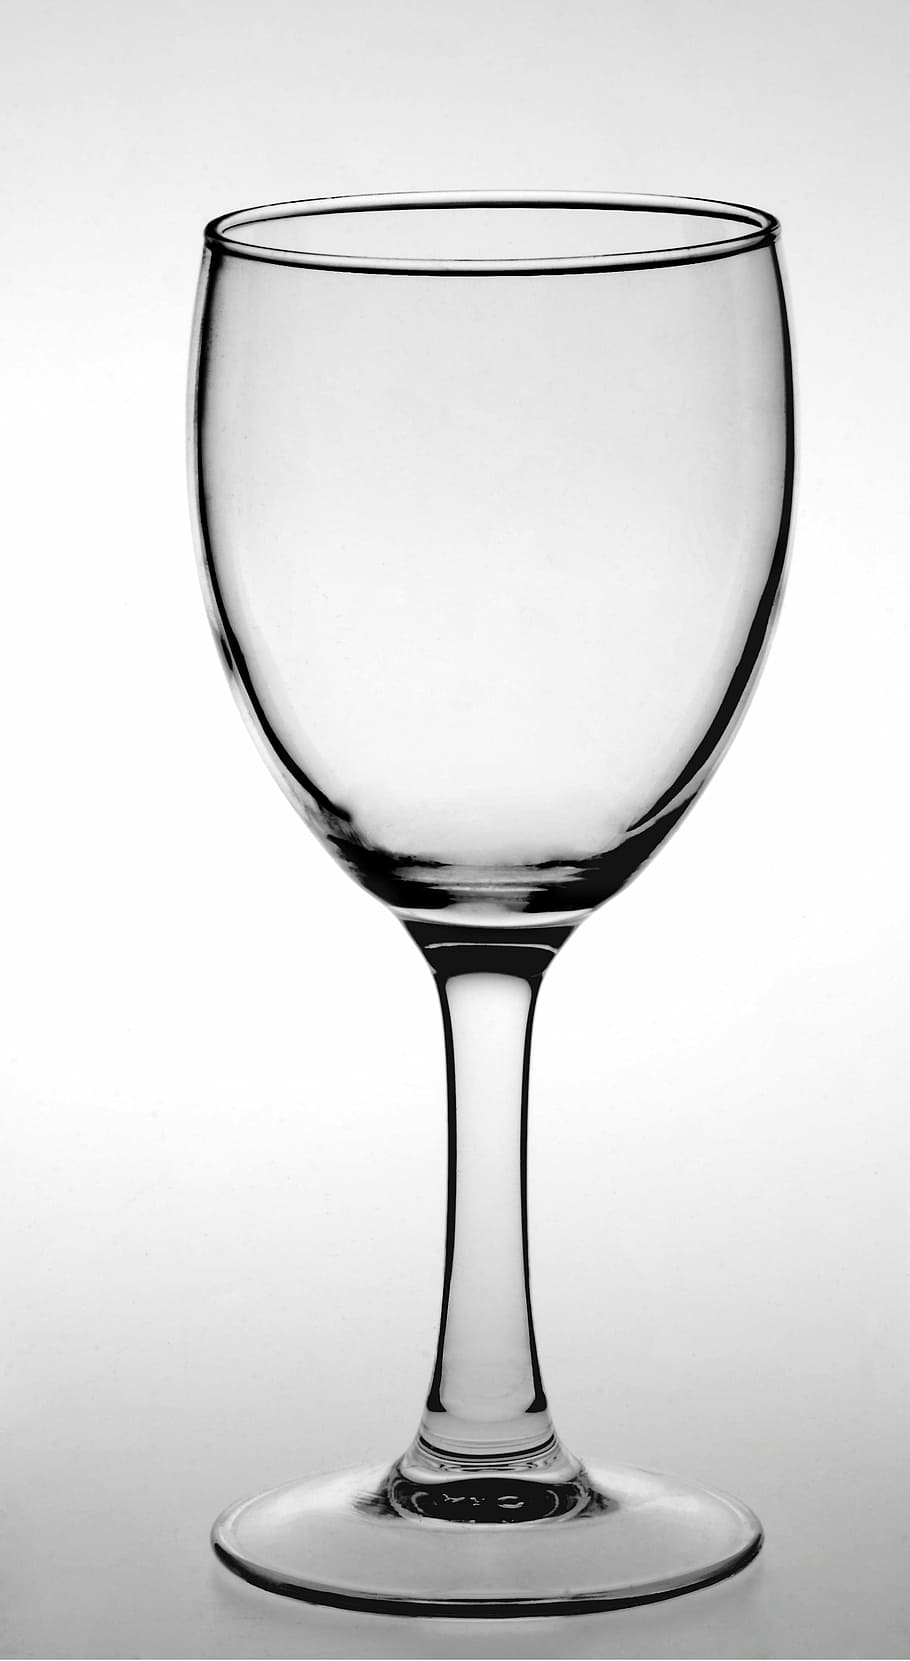 clear wine glass, white background, black lines, goblet, red wine glass